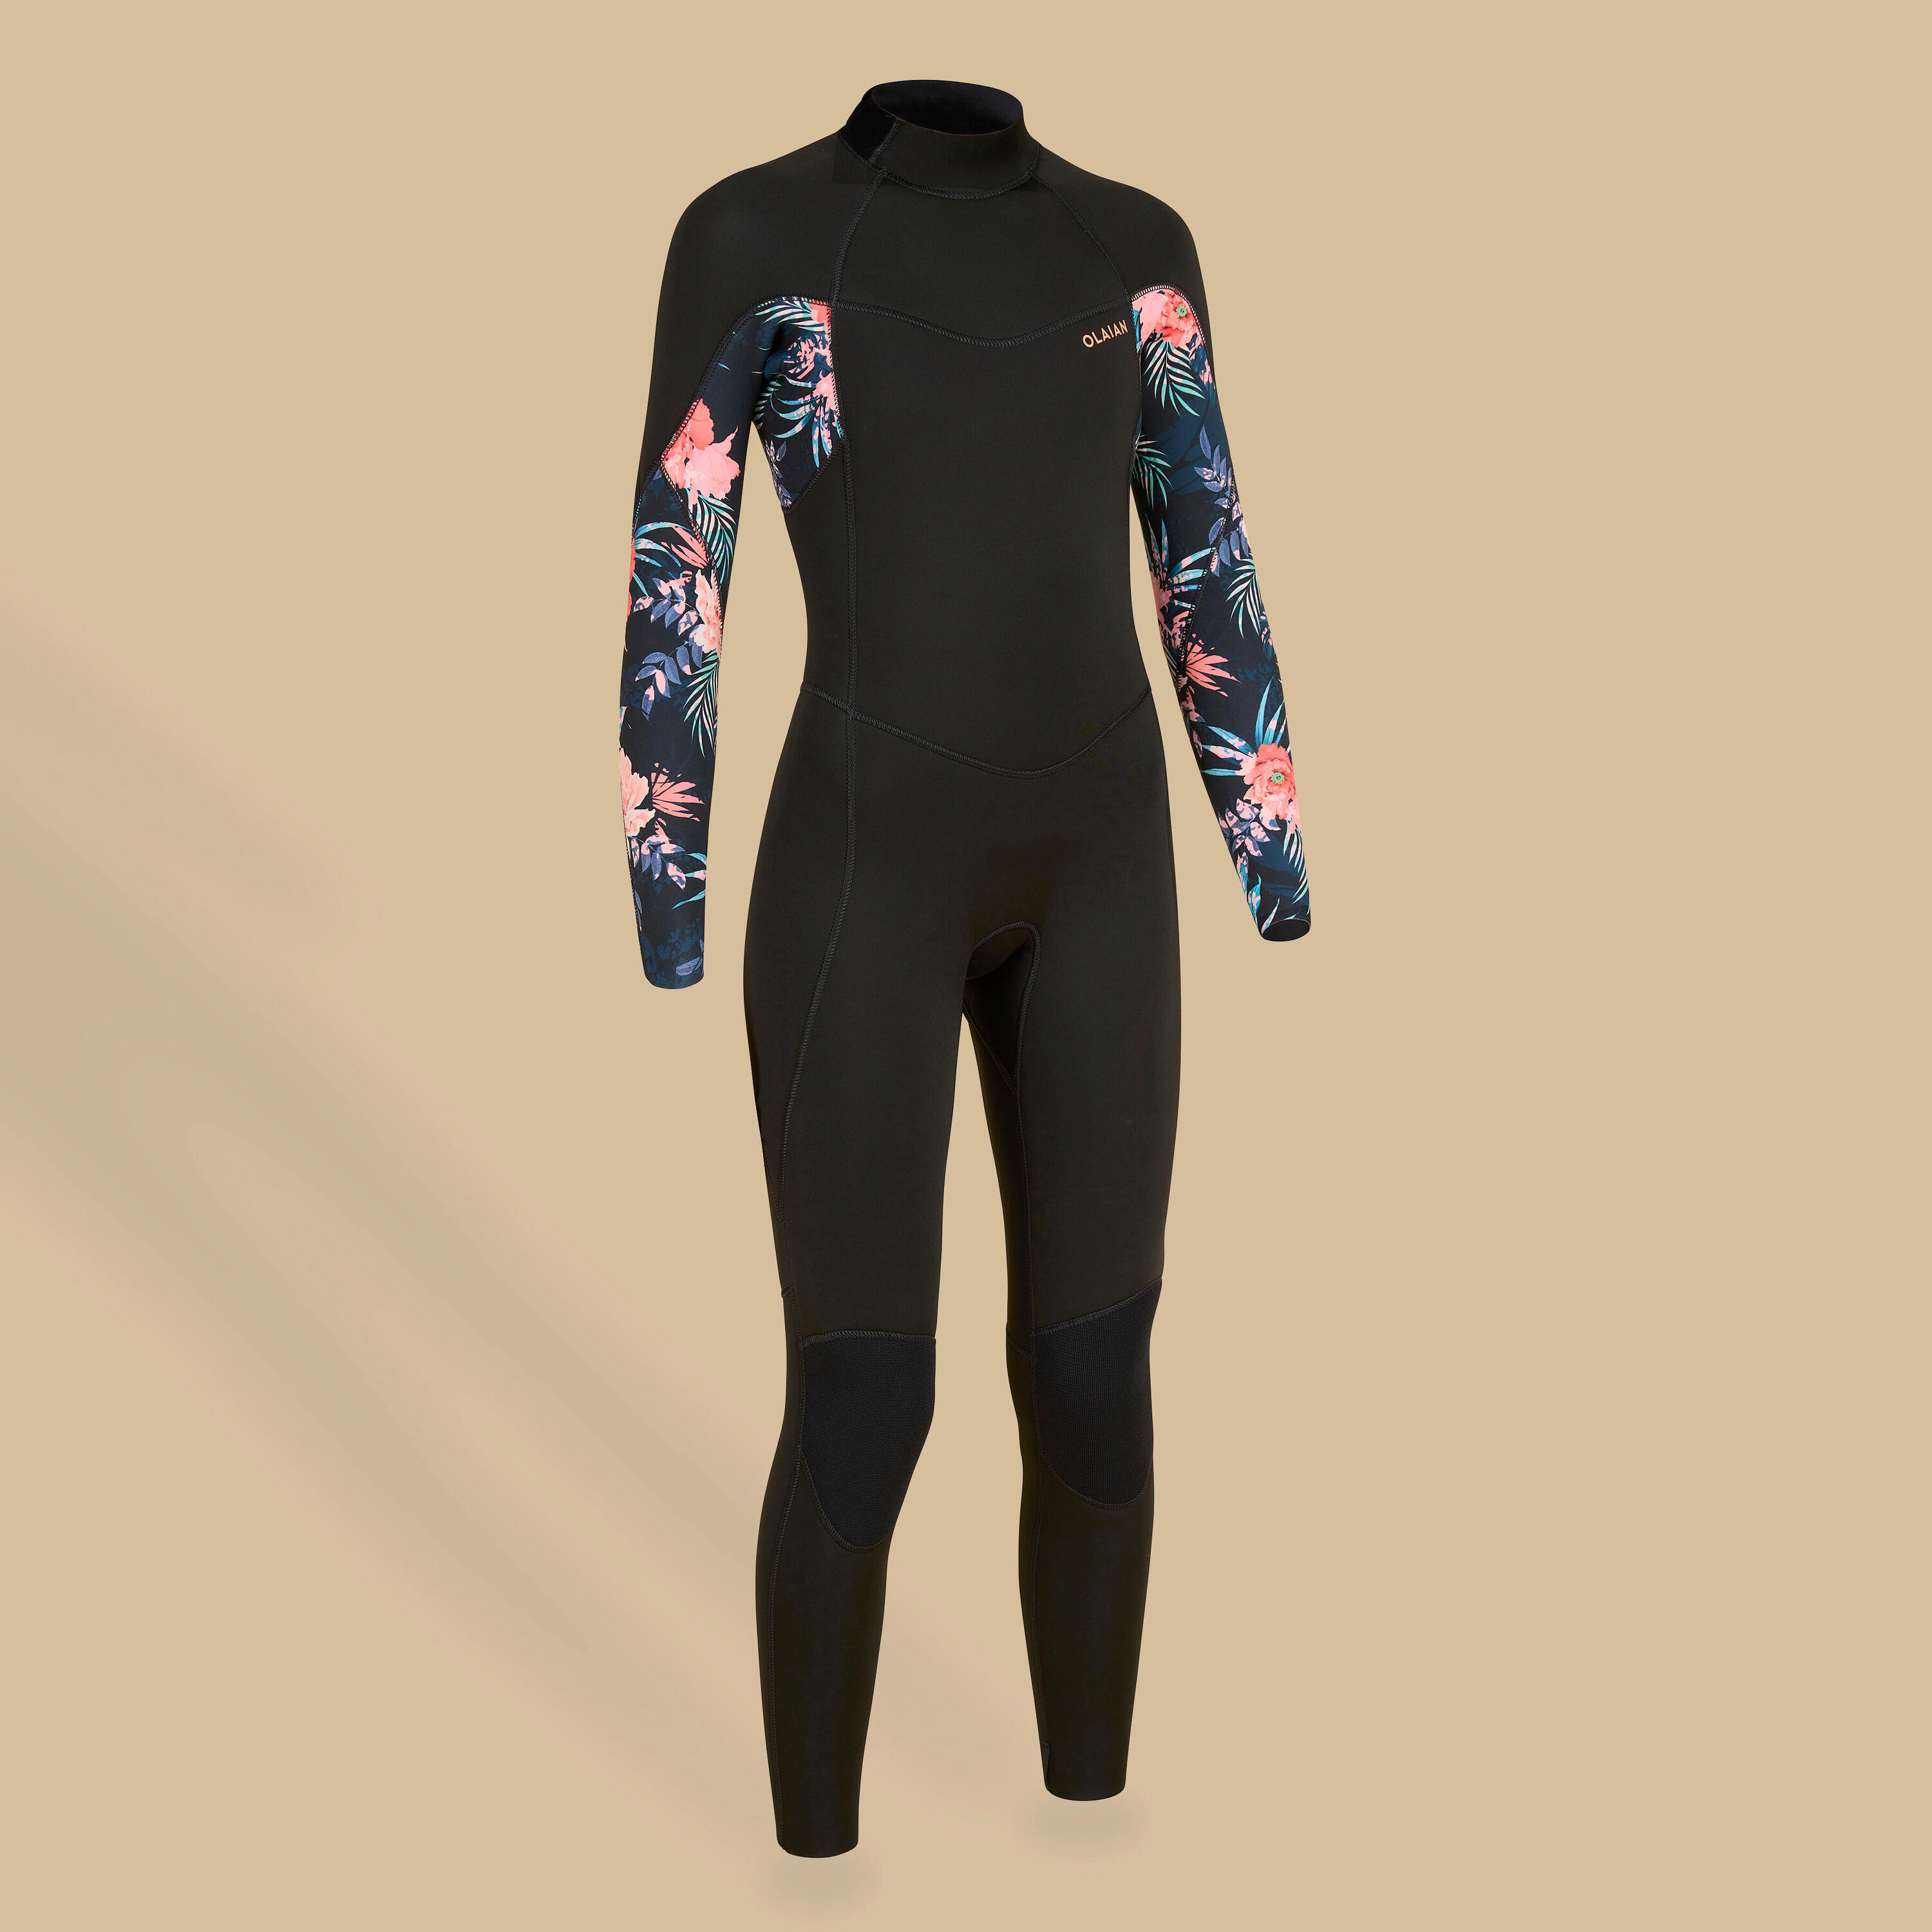 OLAIAN GIRL'S SURFING WETSUIT 500 4/3 MM BLACK RED